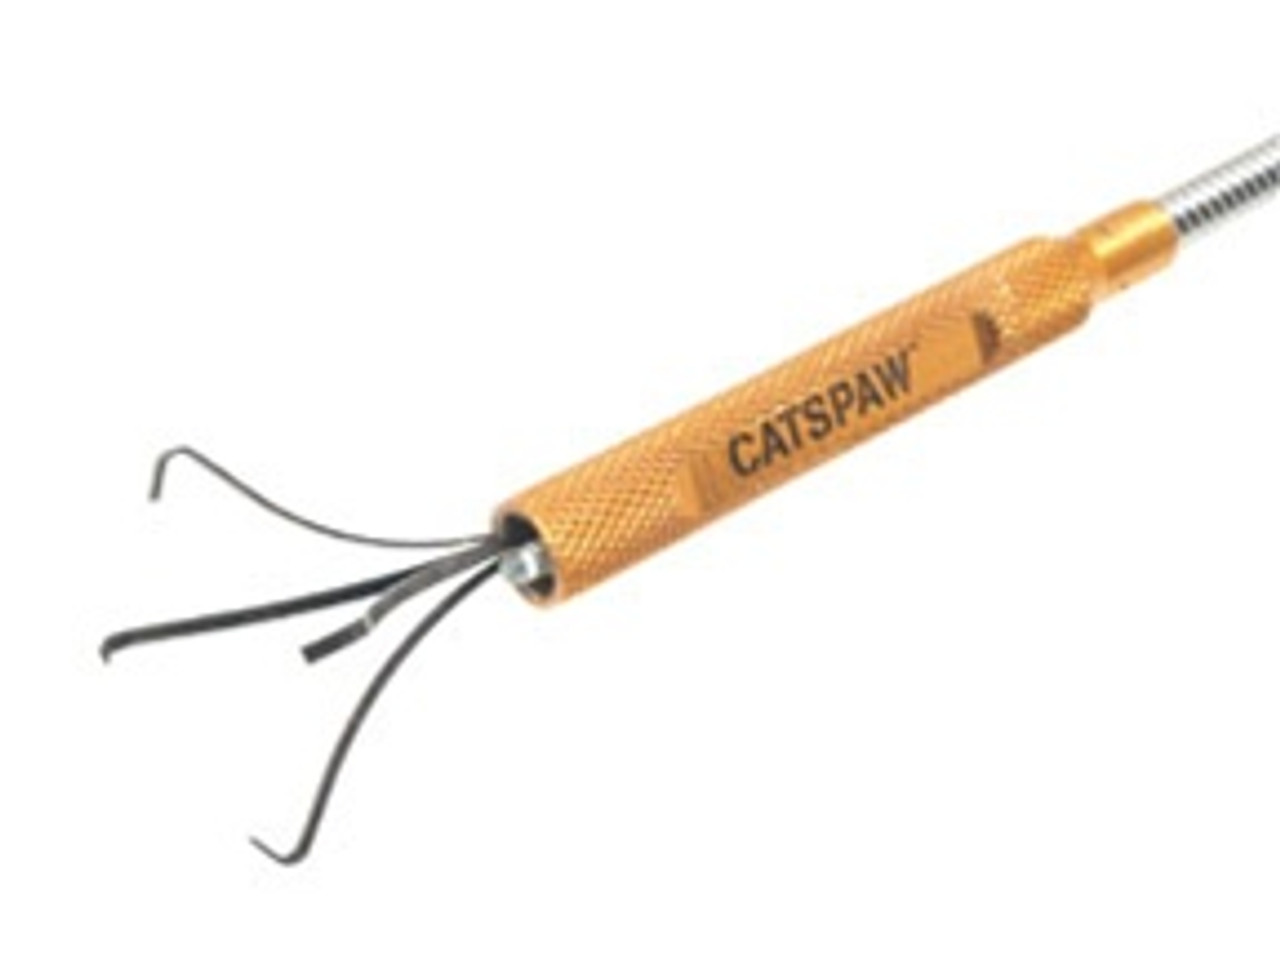 Mayhew Tools 45046 Catspaw Lighted Pick Up Claw